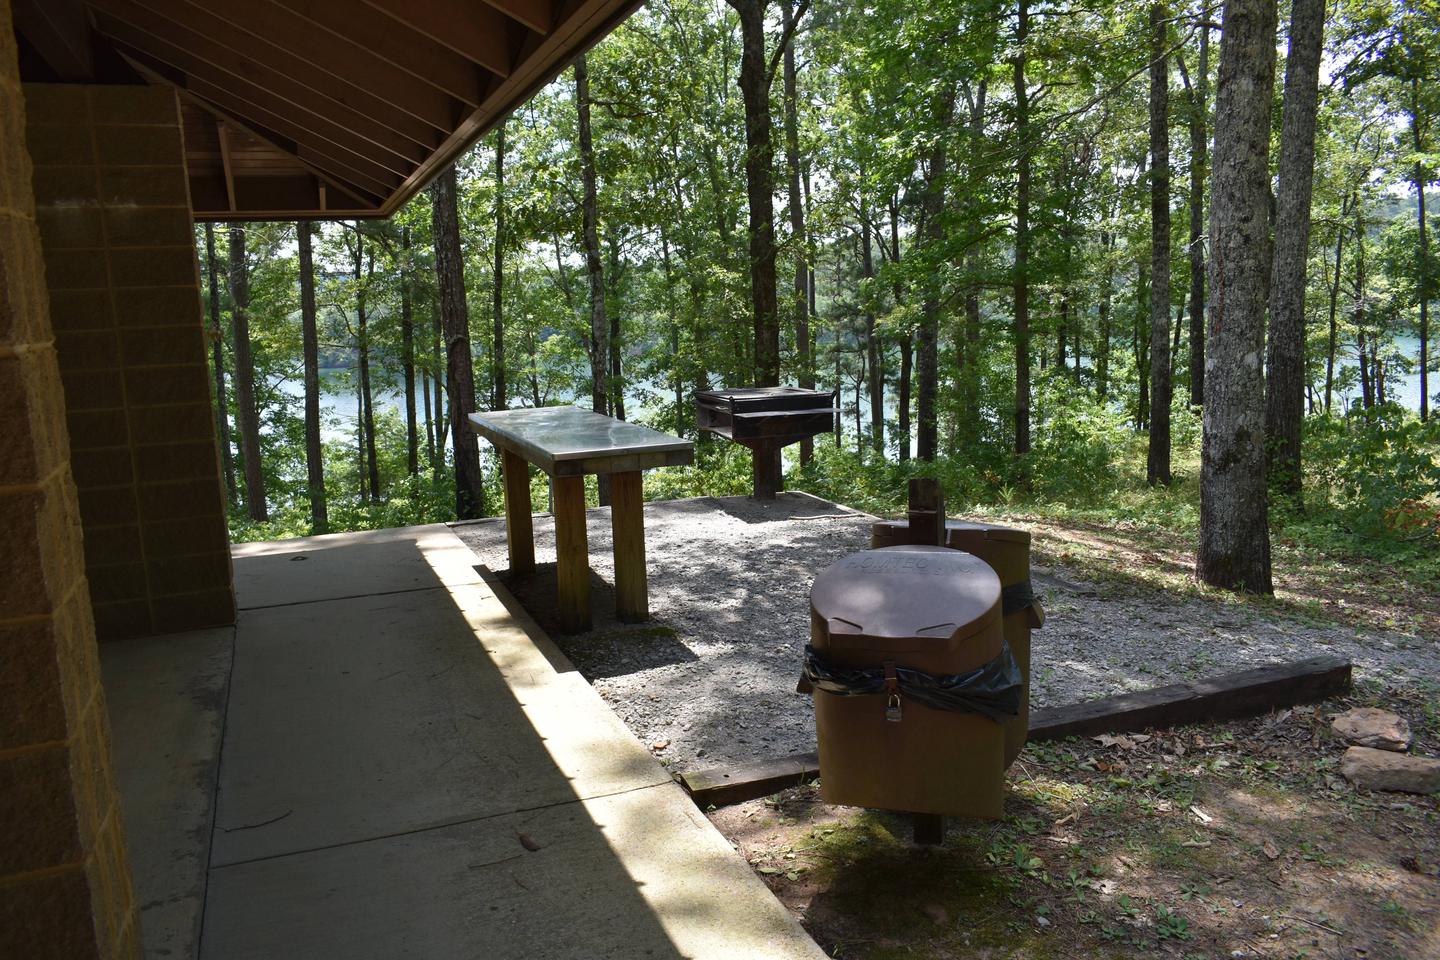 Corinth Recreation Area Day Use Picnic Pavilion3Corinth Recreation Area Day Use Picnic Pavilion
July 10th, 2019